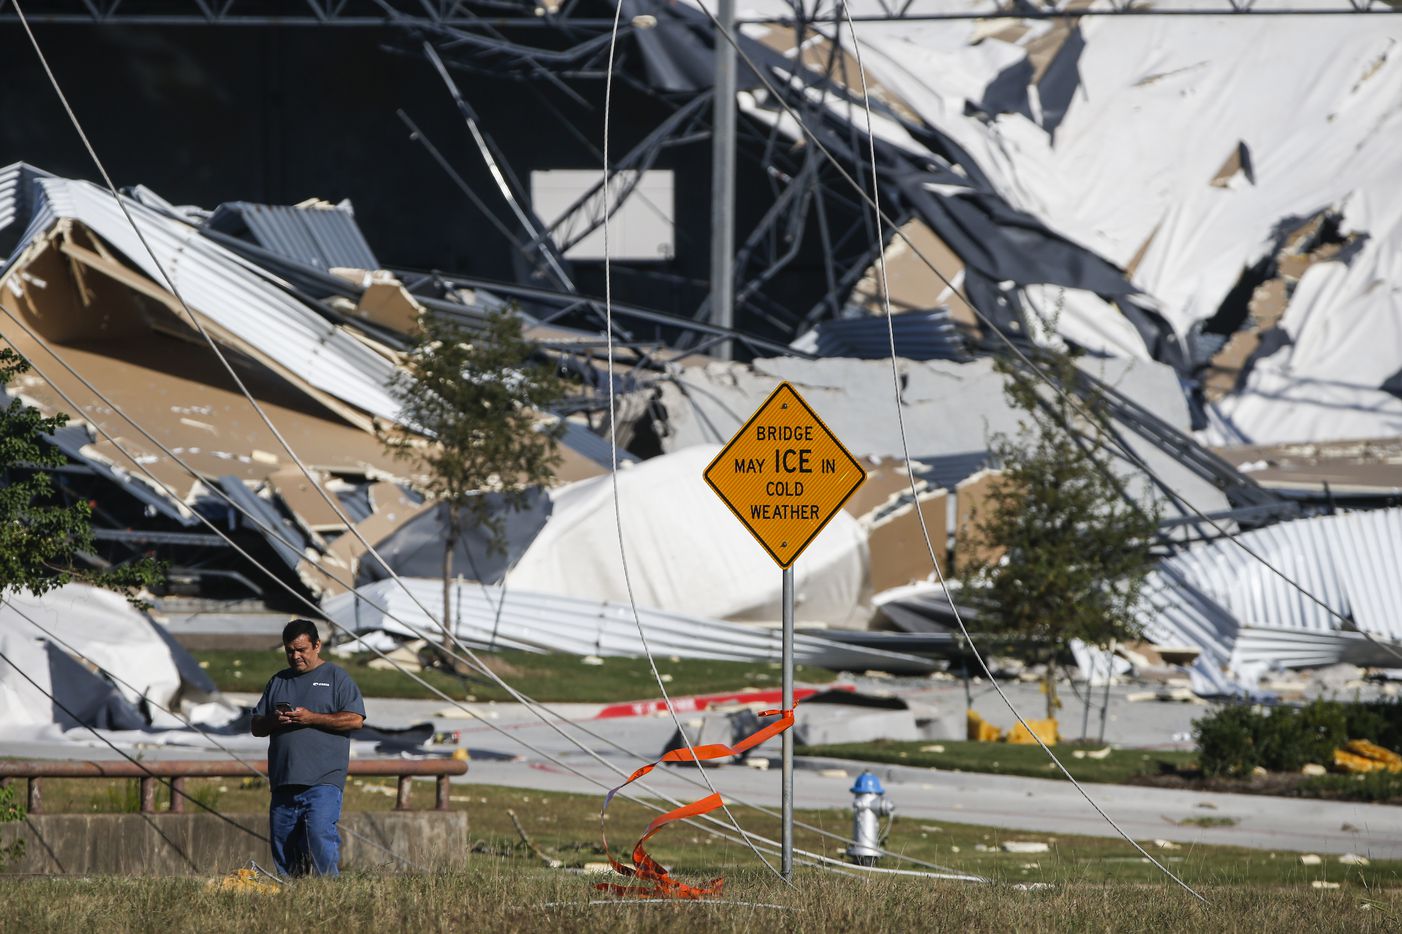 A collapsed building, damaged from a tornado the night before is seen near West Miller Road and South Shiloh Road in Garland, Texas, on Sunday, Oct. 21, 2019.